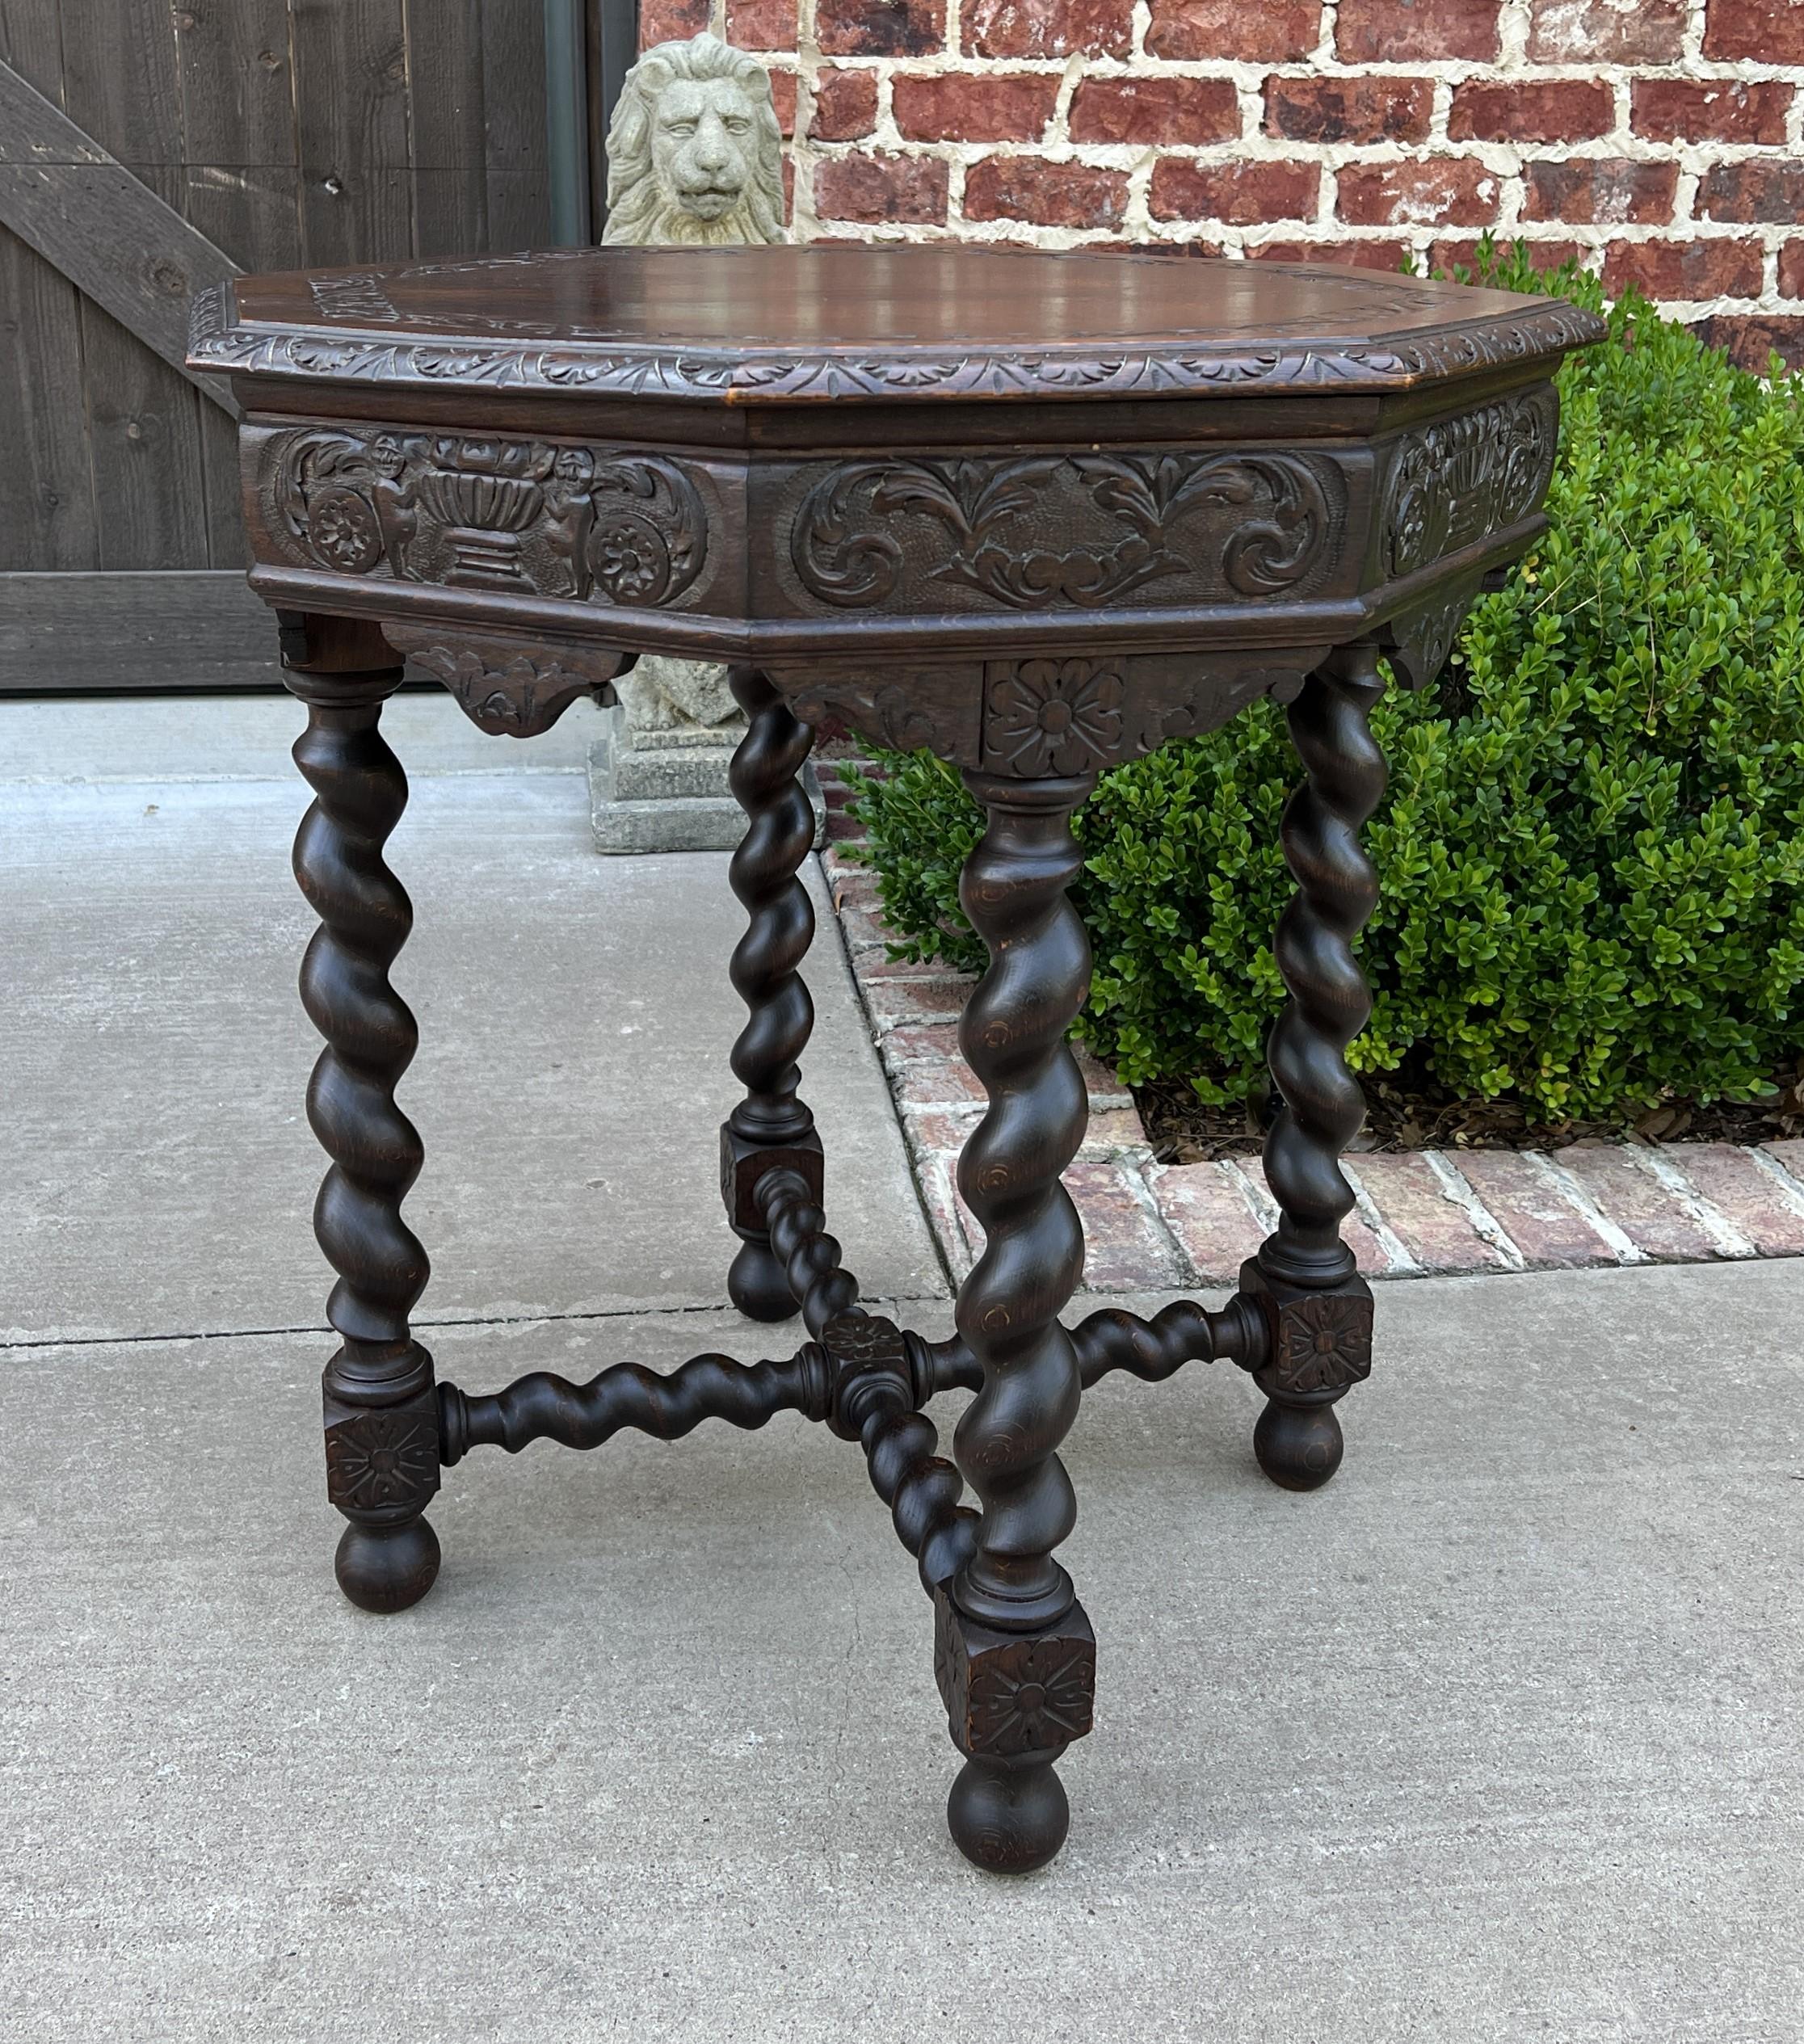 Antique French Table Barley Twist Octagonal Renaissance Revival Oak Carved 19thc In Good Condition For Sale In Tyler, TX